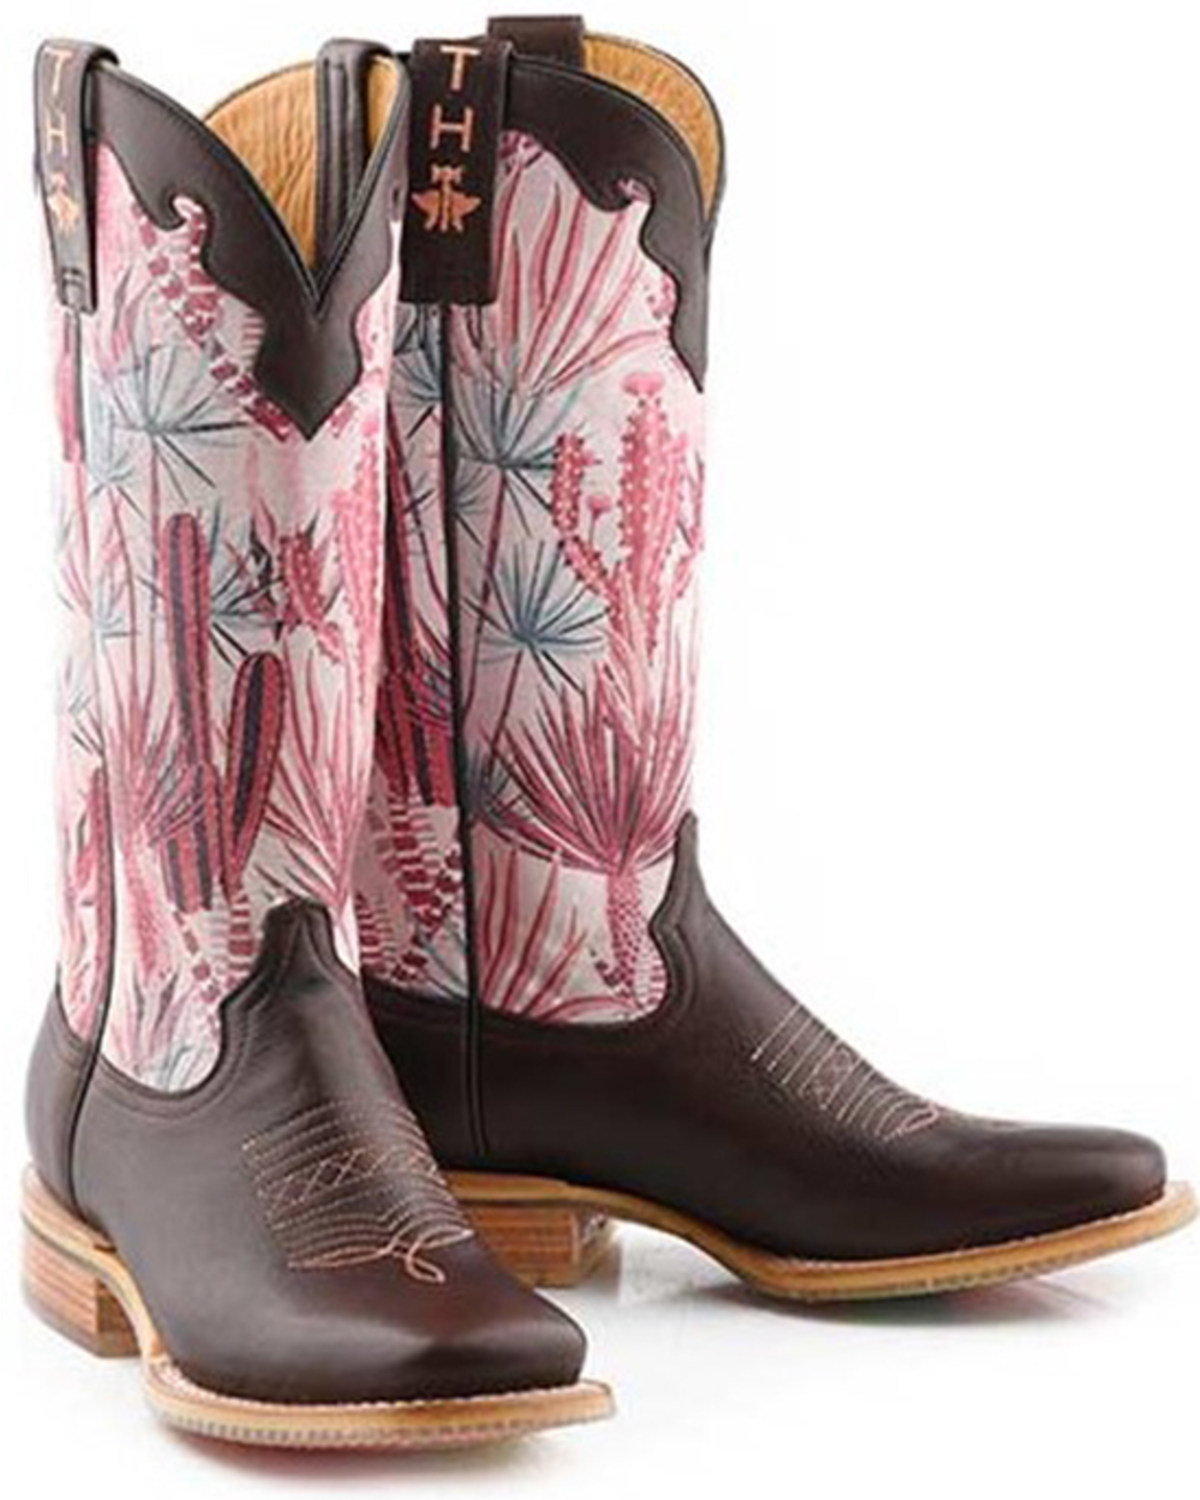 Tin Haul Women's Pinktalicious Western Boots - Broad Square Toe